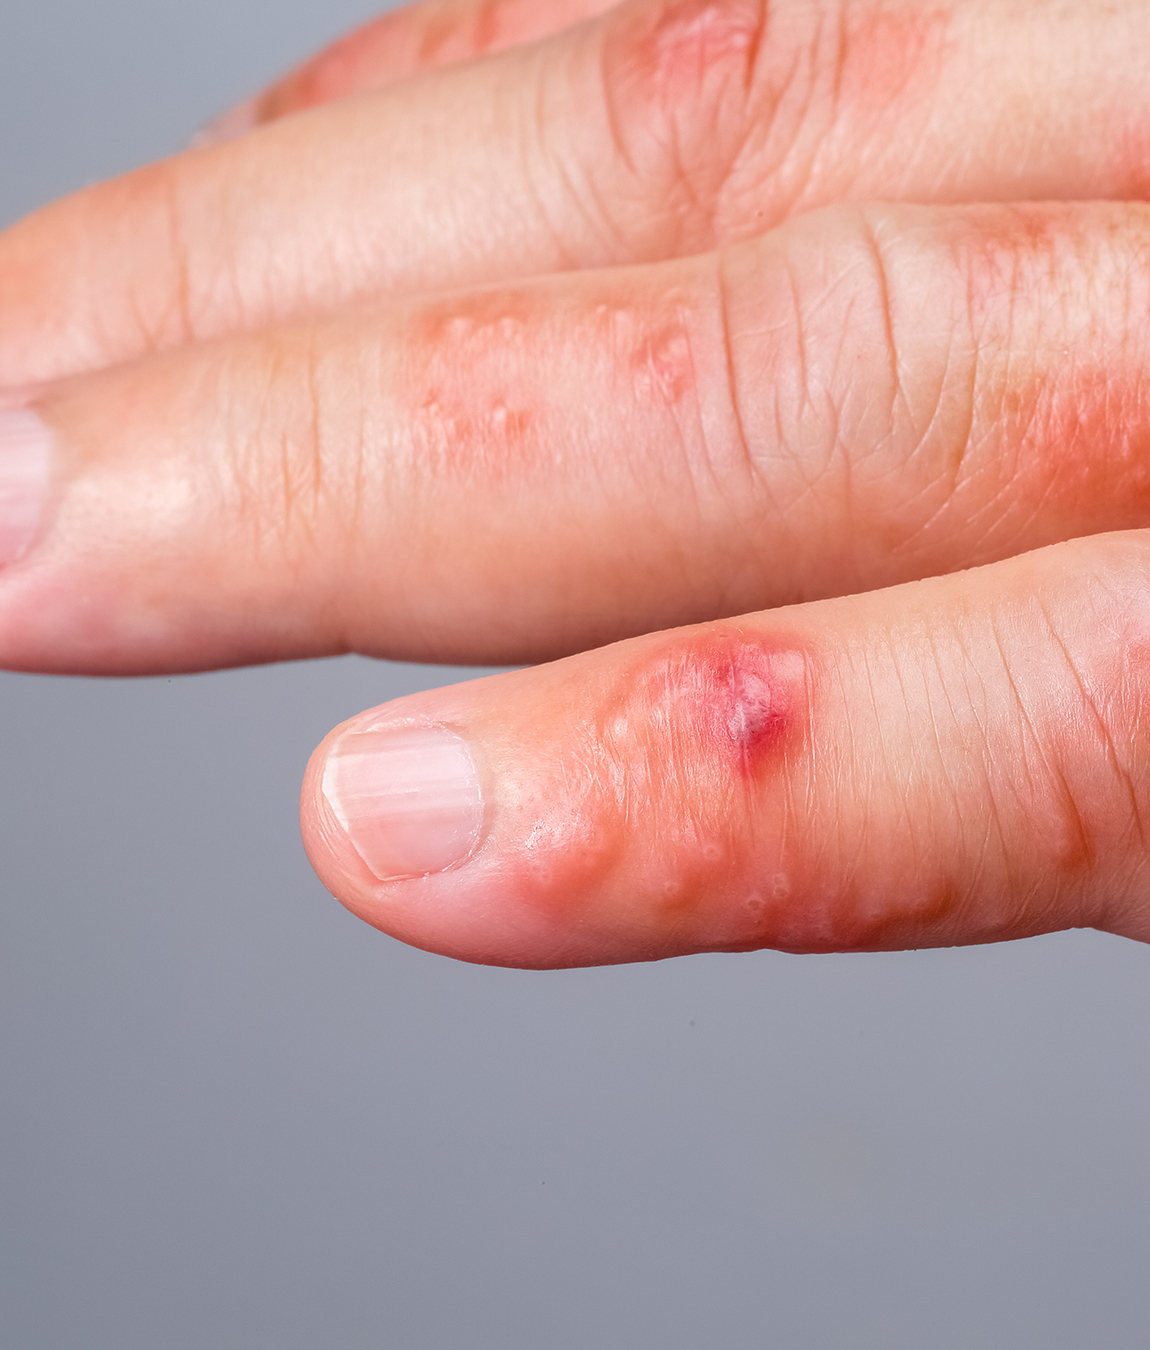 Scabies on a person's fingers